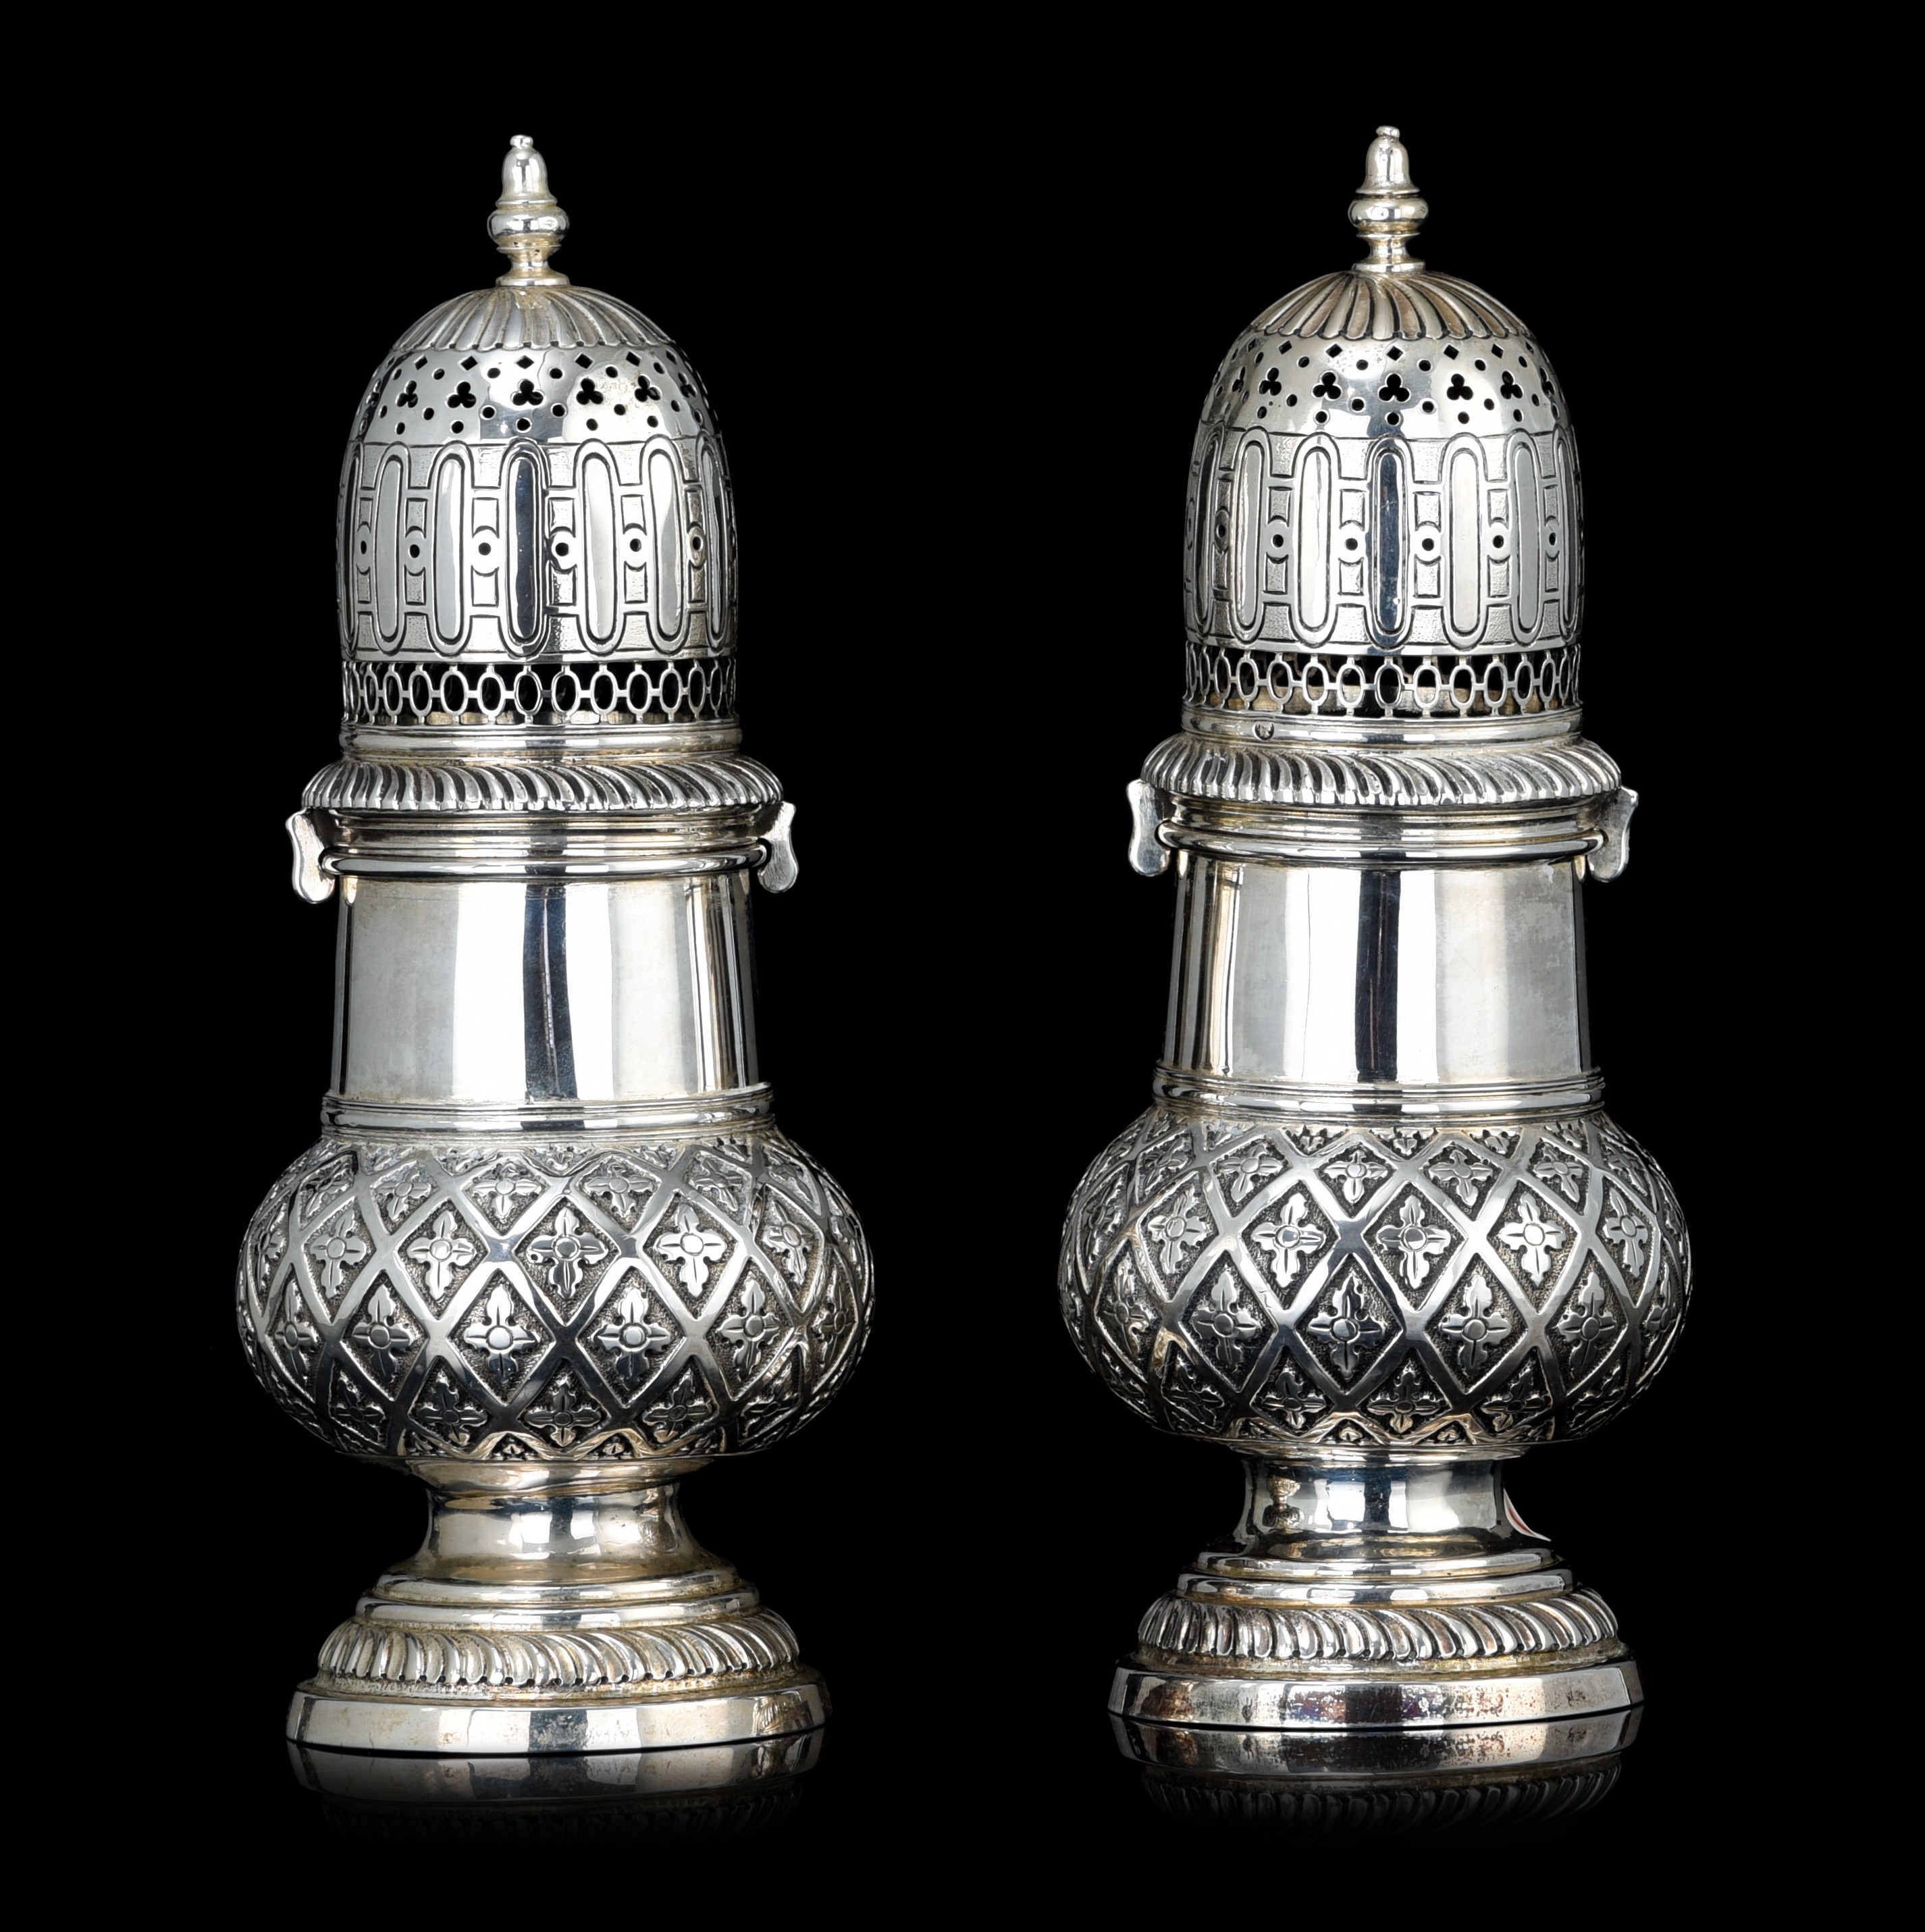 An imposing pair of silver casters, H 20,5 cm, ca 673 g